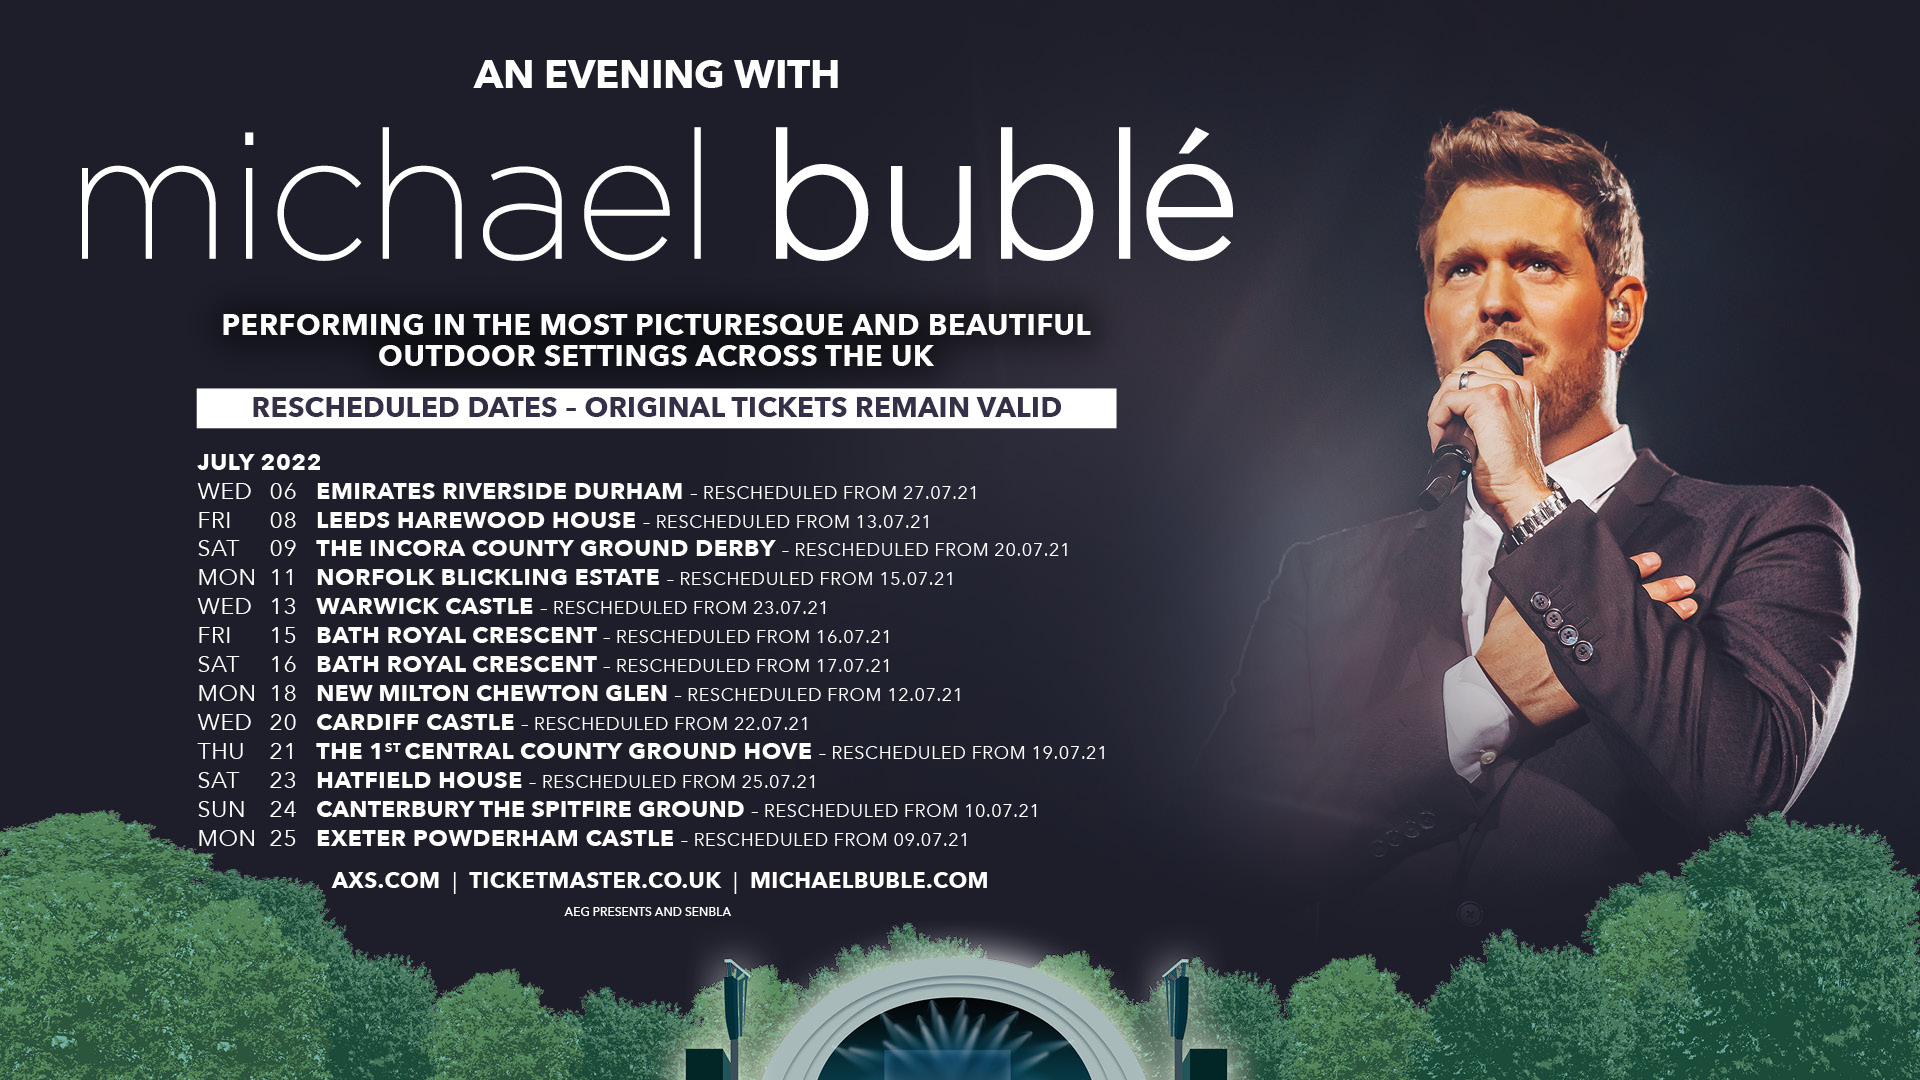 Michael Bublé concert re-scheduled for 2022 - Derbyshire County Cricket